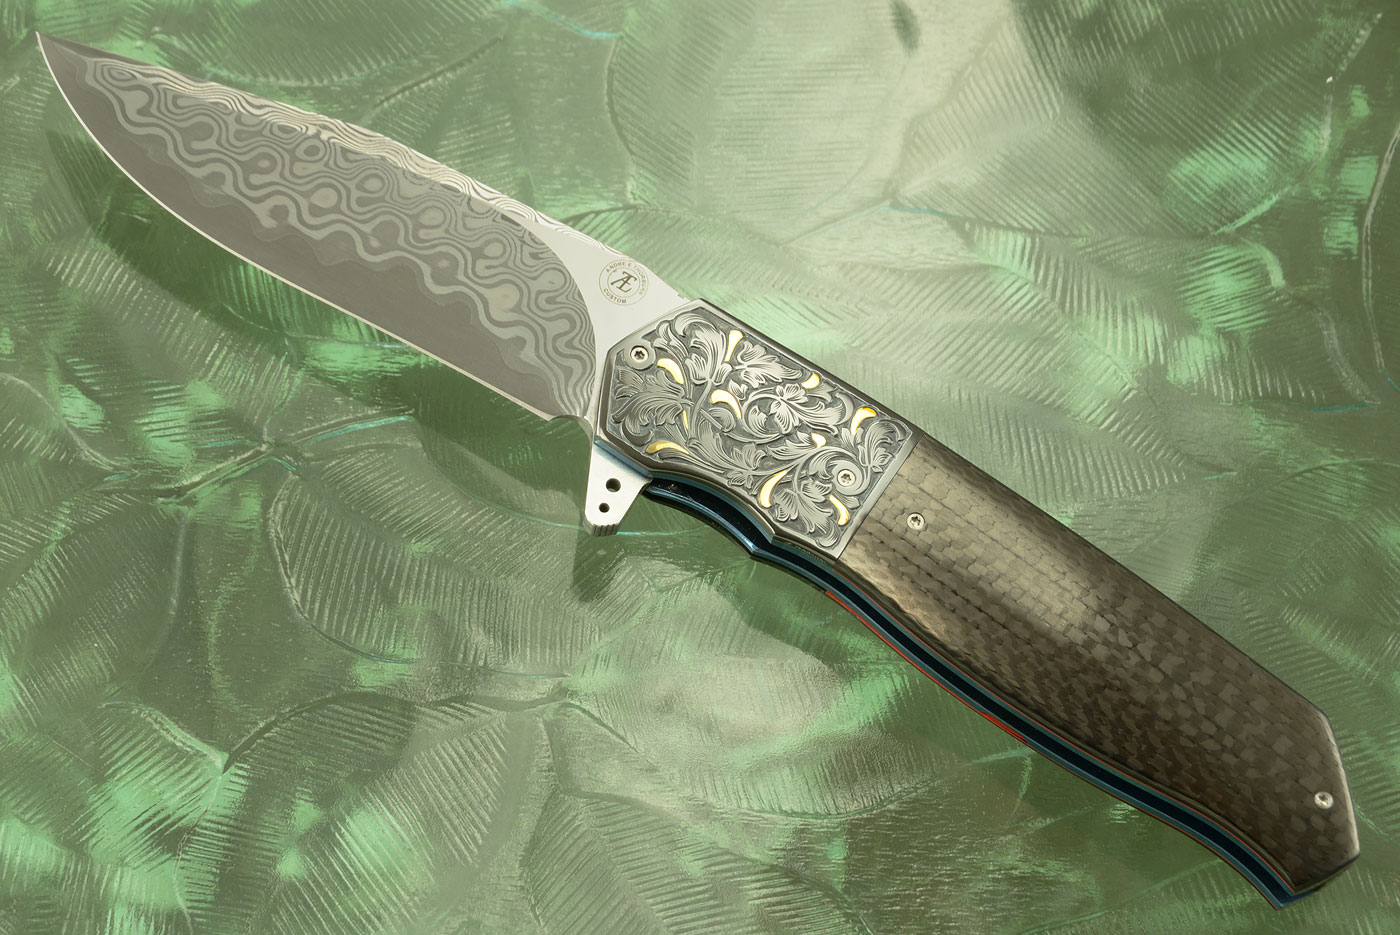 L36M Flipper with Damacore, Engraved Zirconium with Gold Inlay, and Carbon Fiber (Ceramic IKBS)